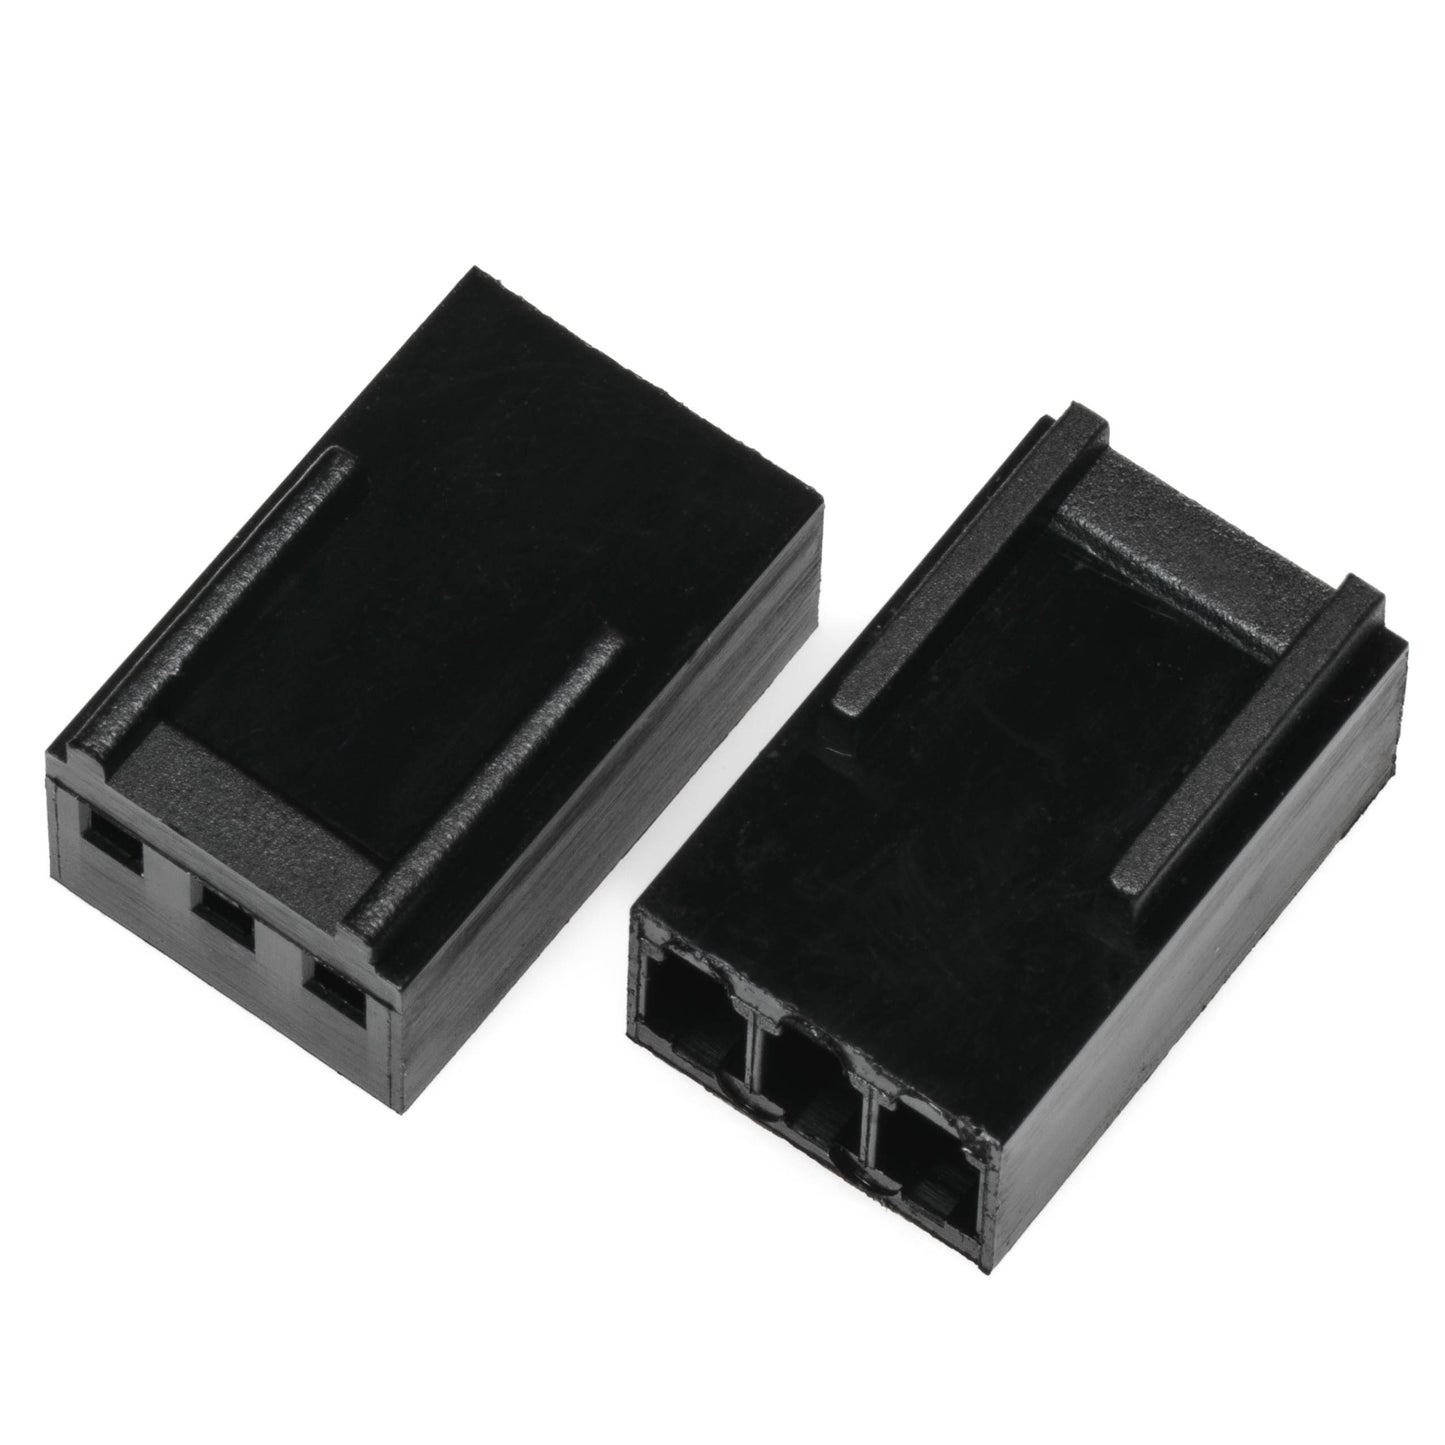 Female 3-Pin PC Fan Connector Kit - 10 Pack